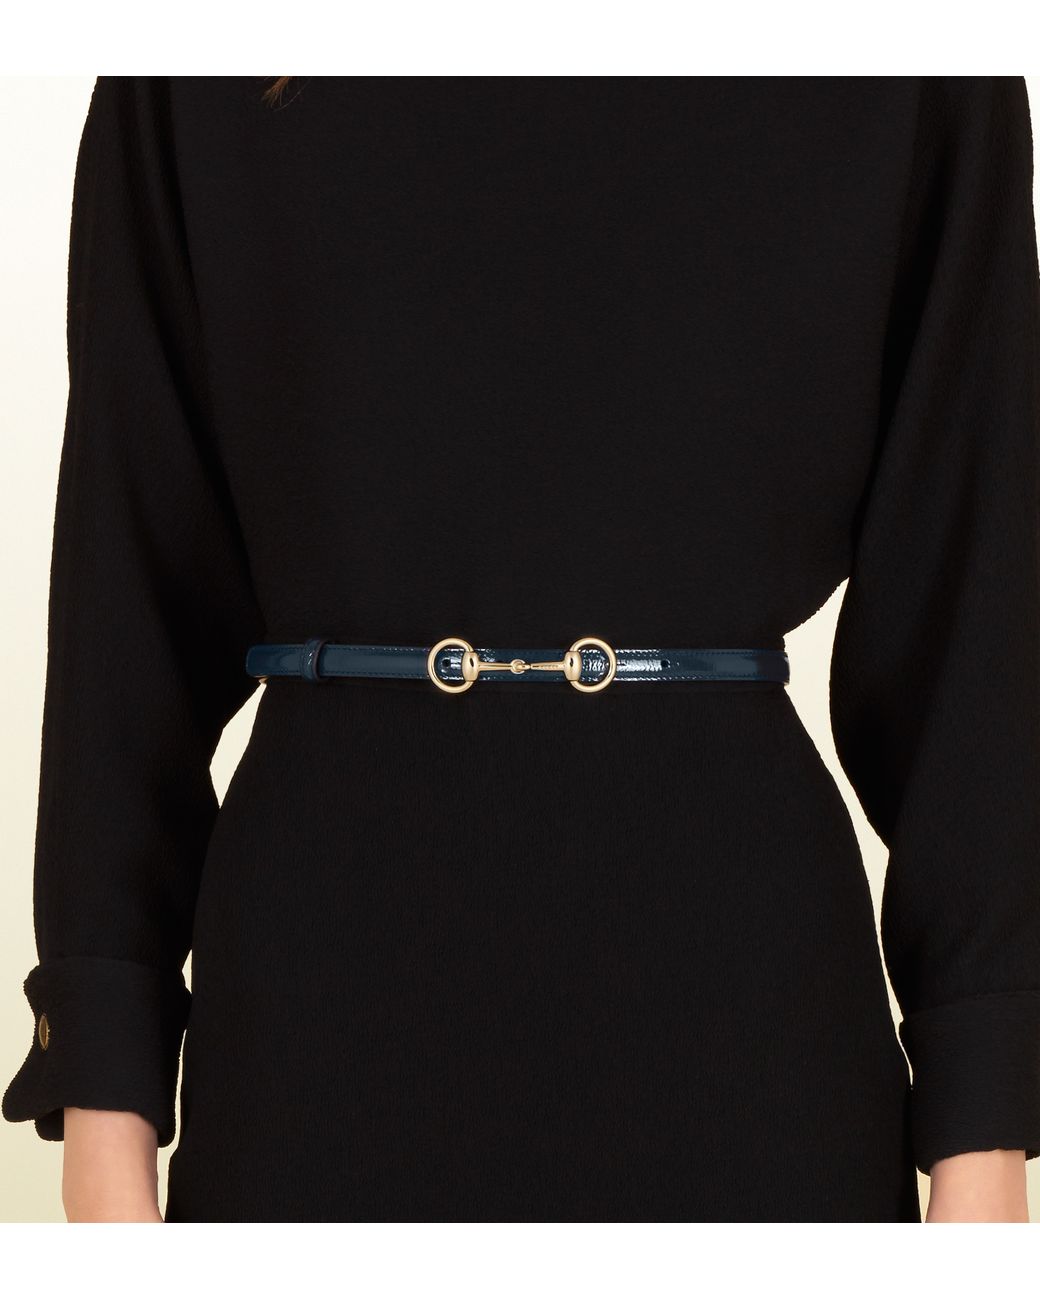 Gucci Patent Leather Skinny Belt with Horsebit Buckle in Blue | Lyst